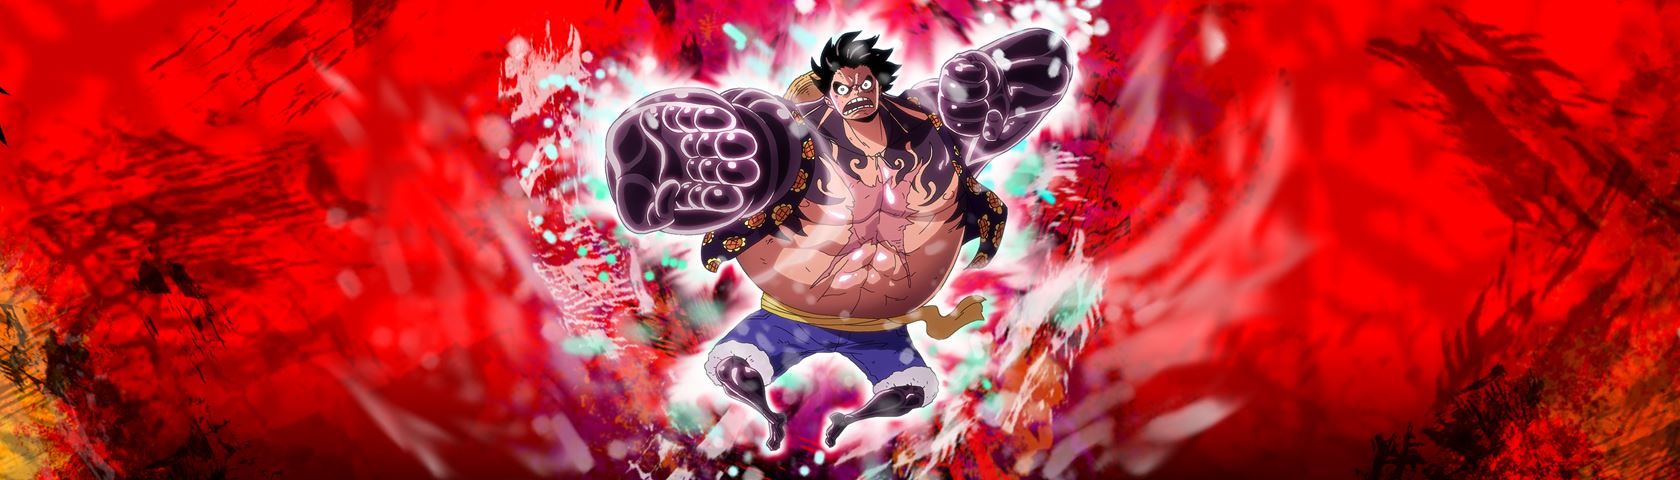 One Piece Dual Monitor Wallpaper Free One Piece Dual Monitor Background